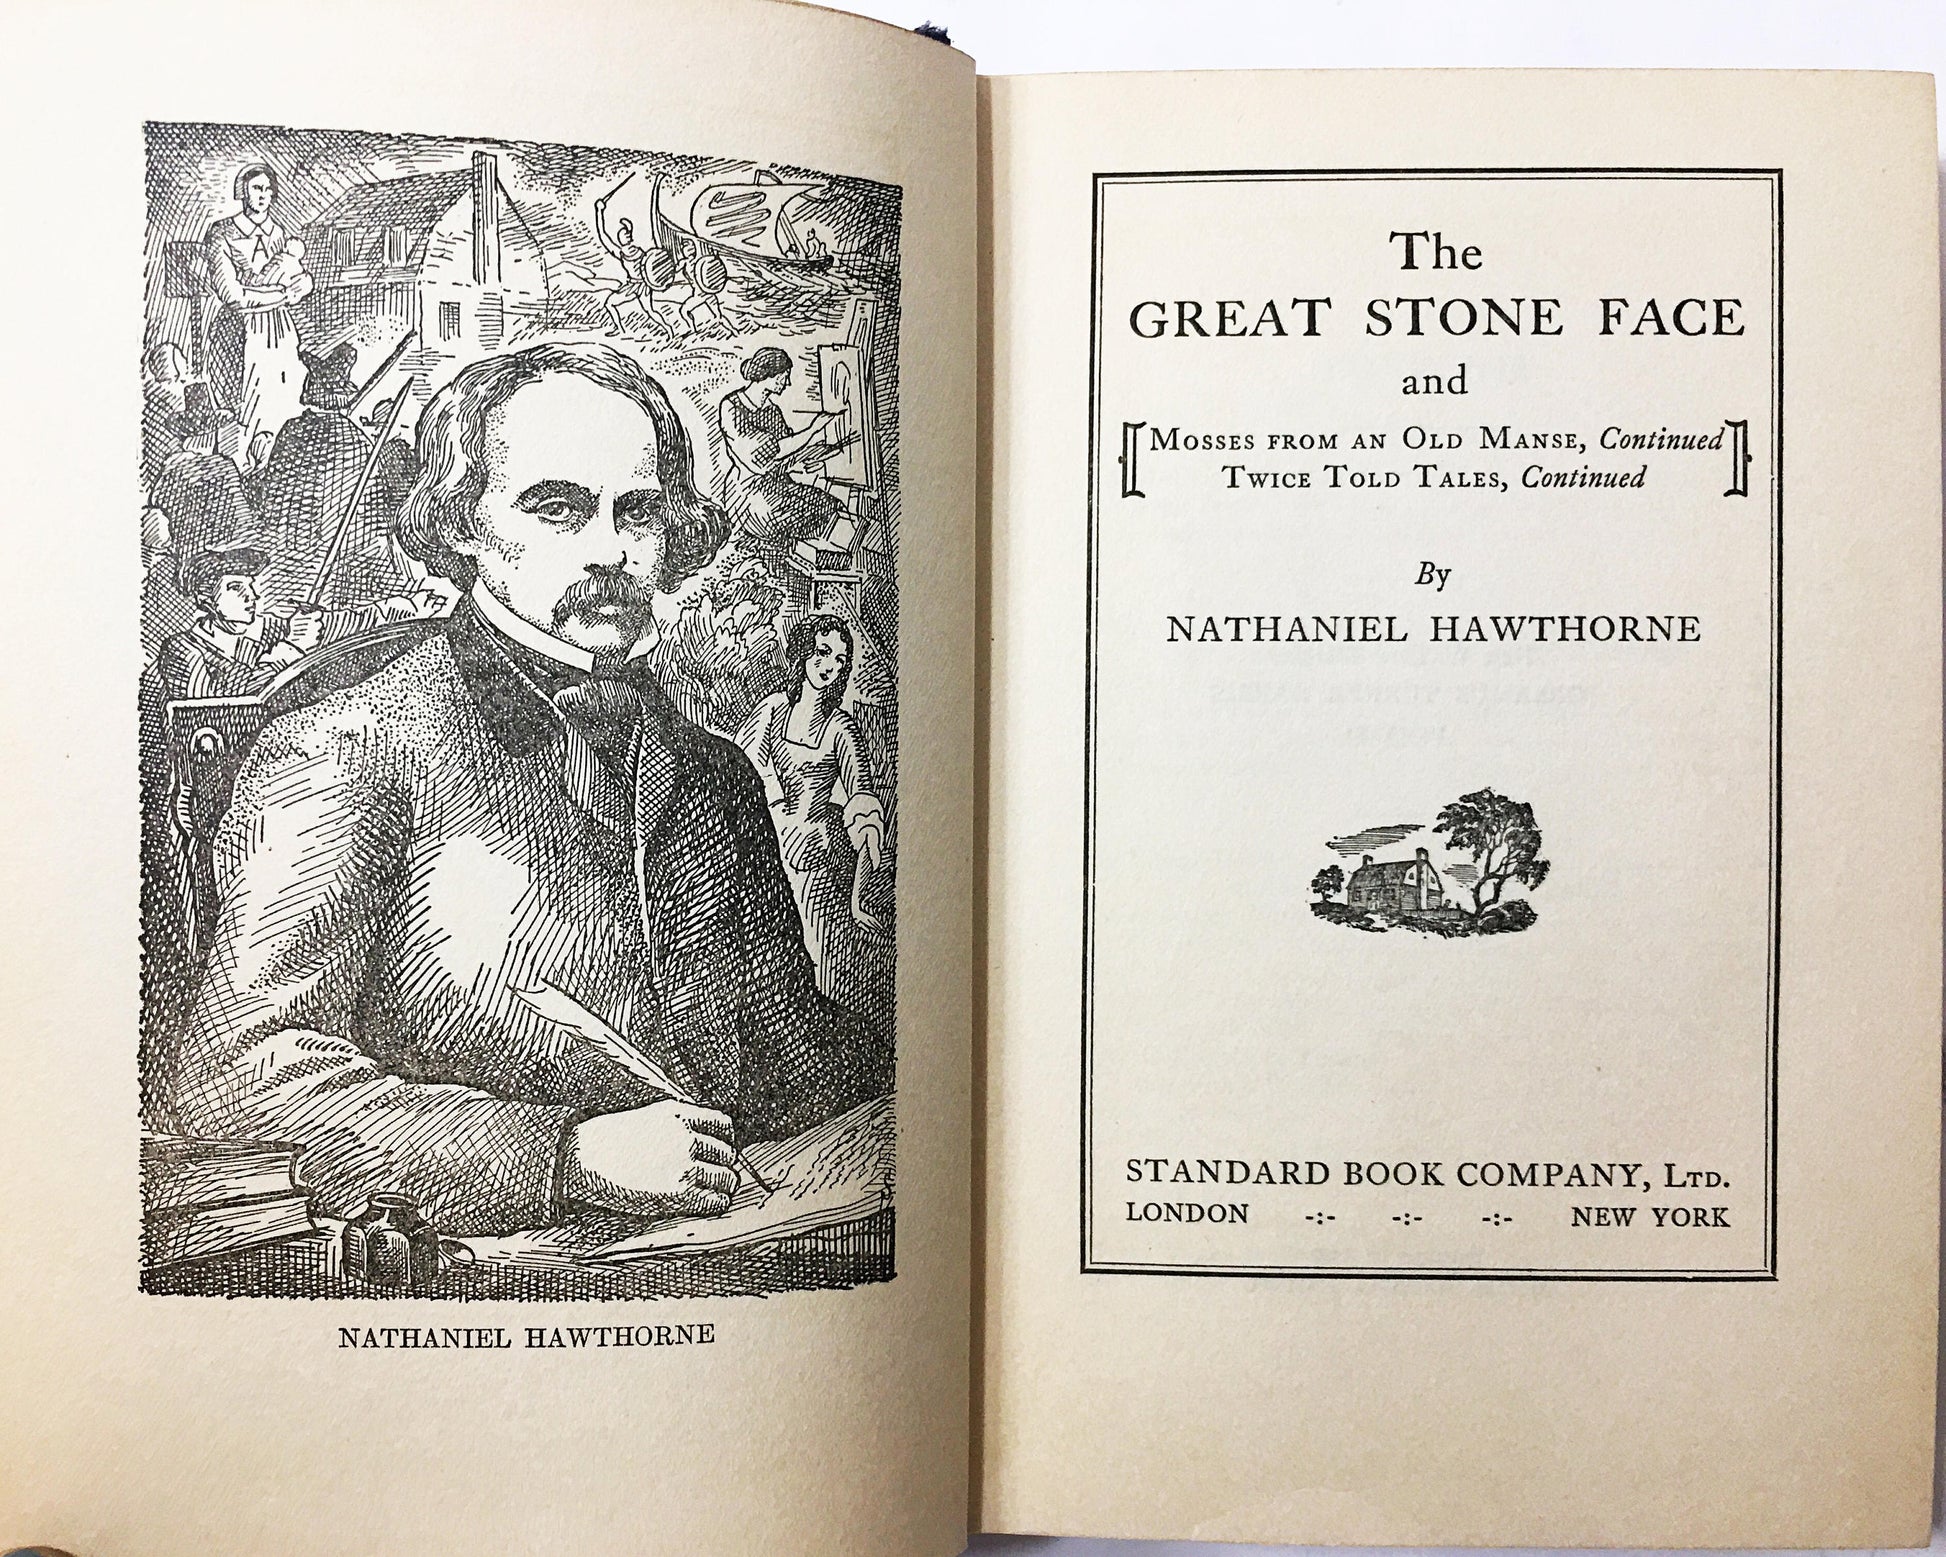 1931 vintage Nathaniel Hawthorne blue book Mosses From An Old Manse Great Stone Face Twice Told Tales